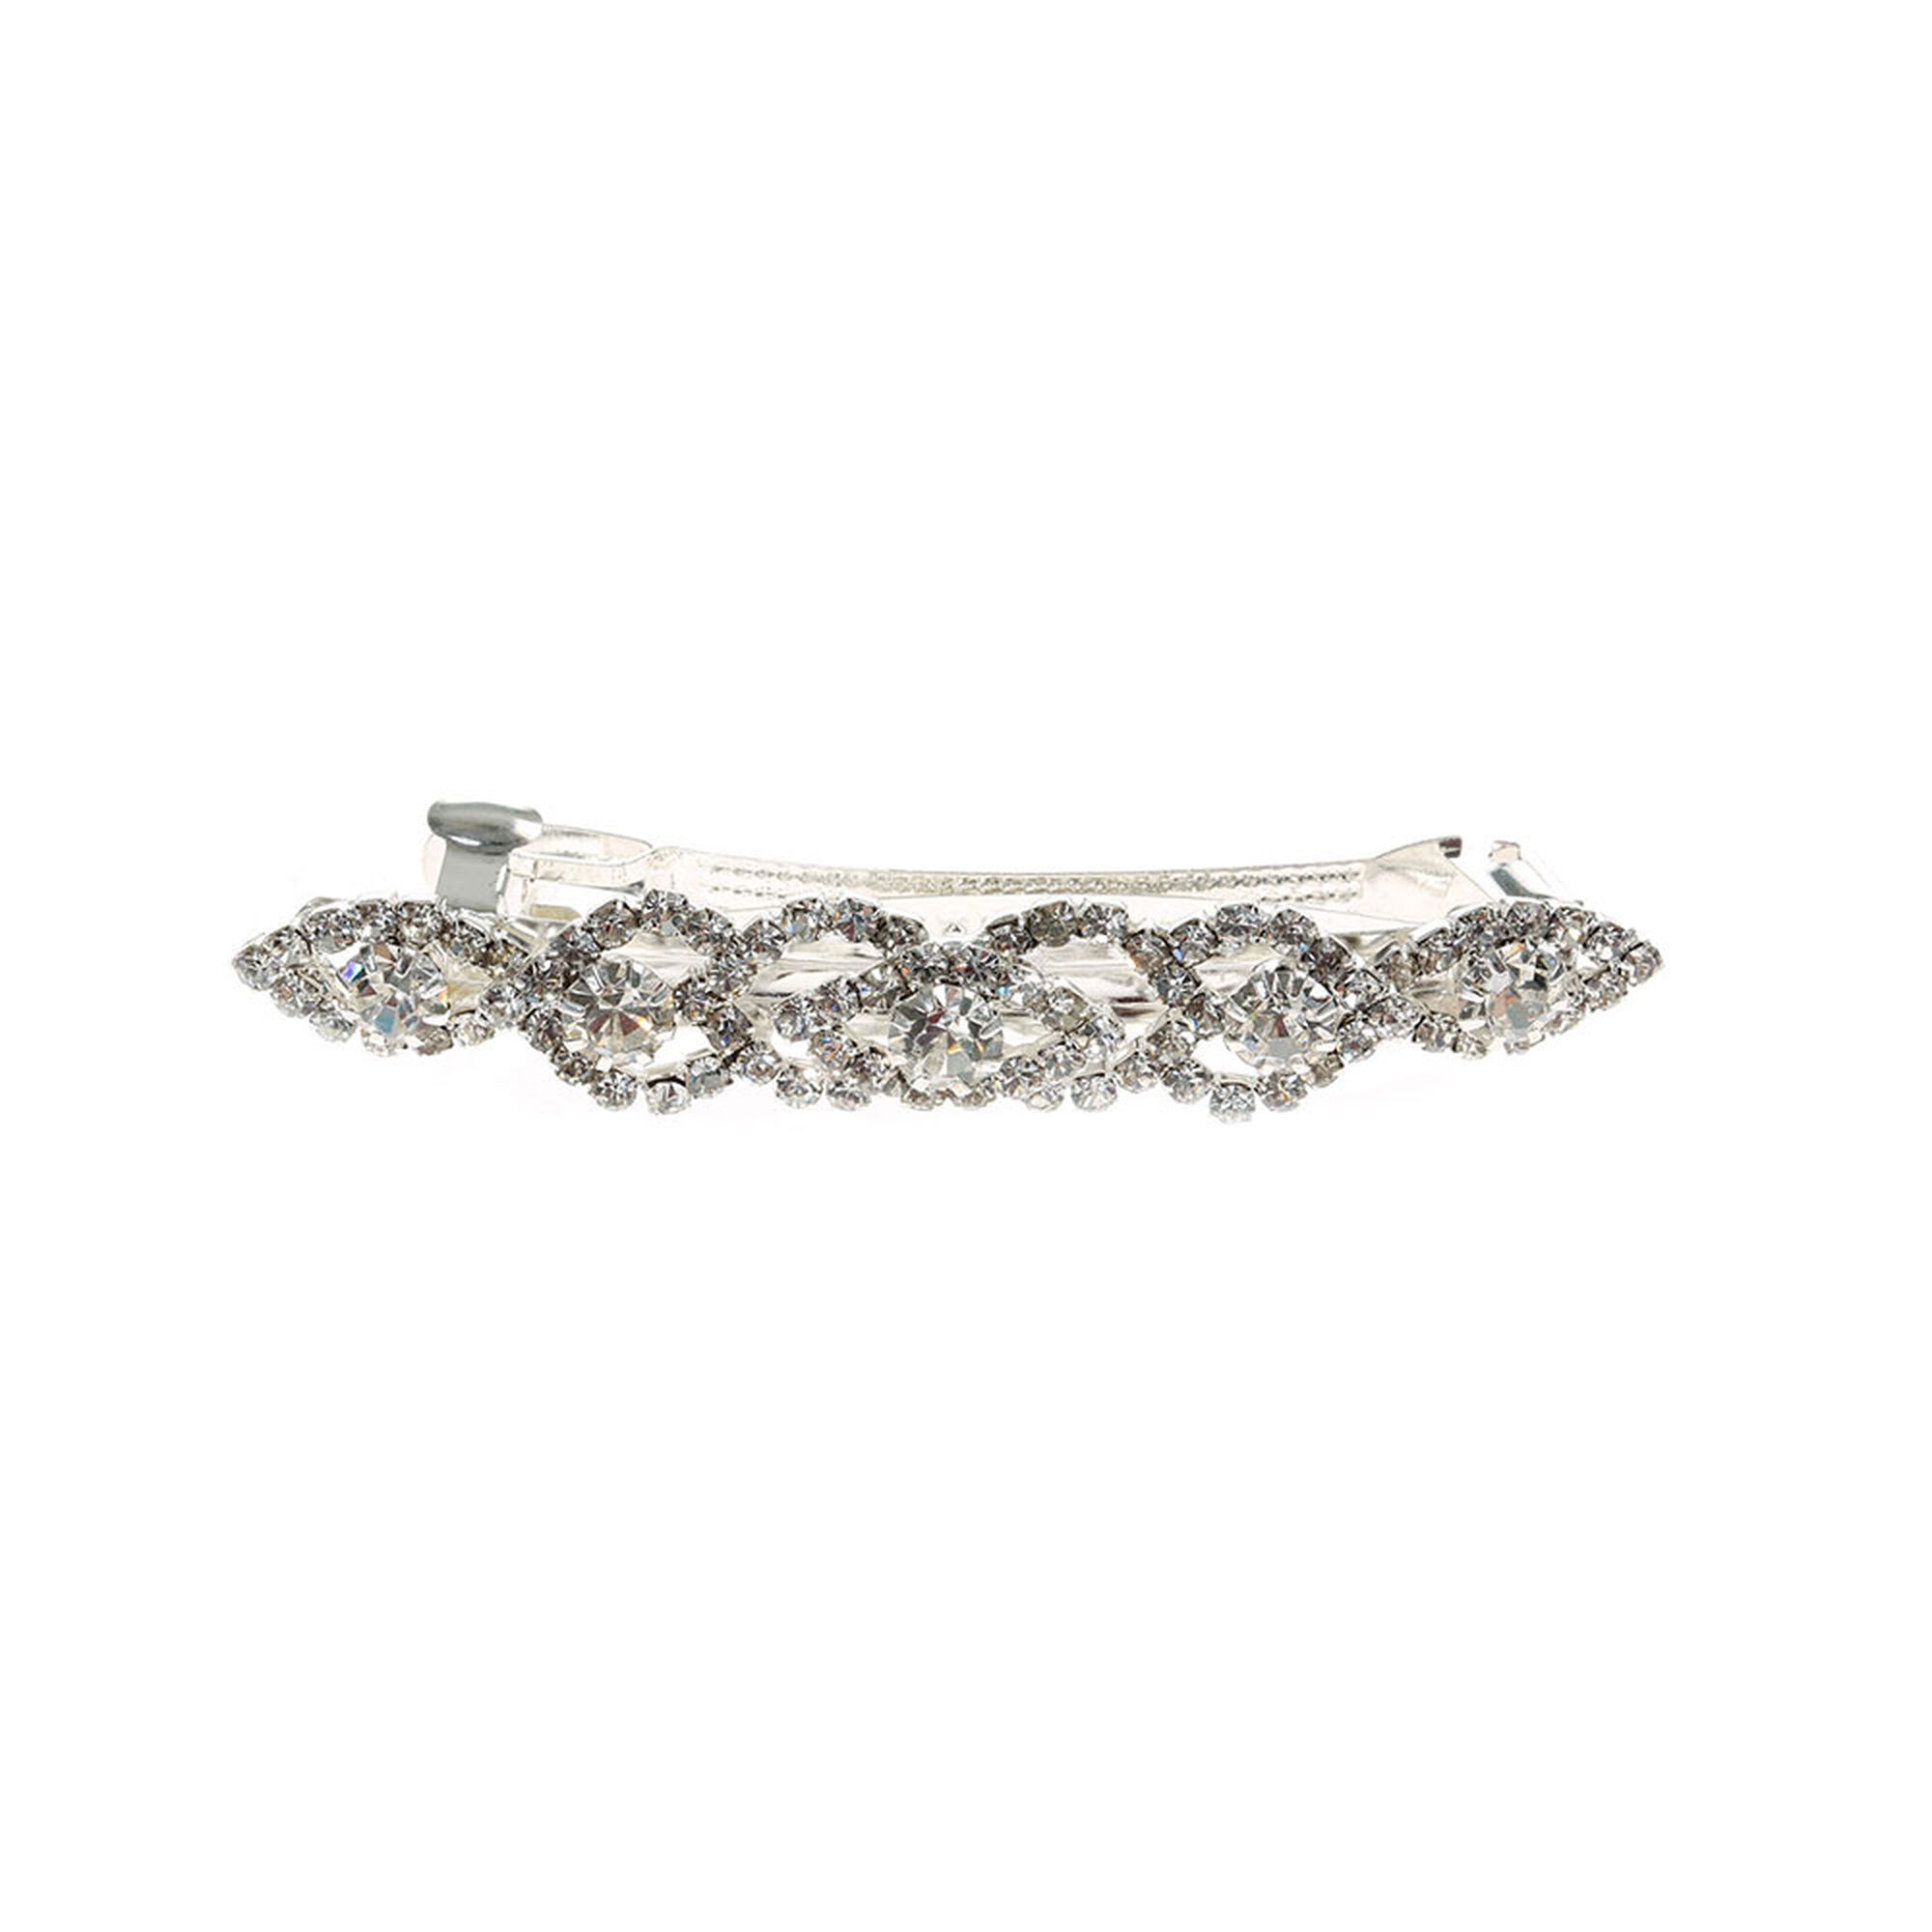 View Claires Crystal Layered Oval Hair Clip information